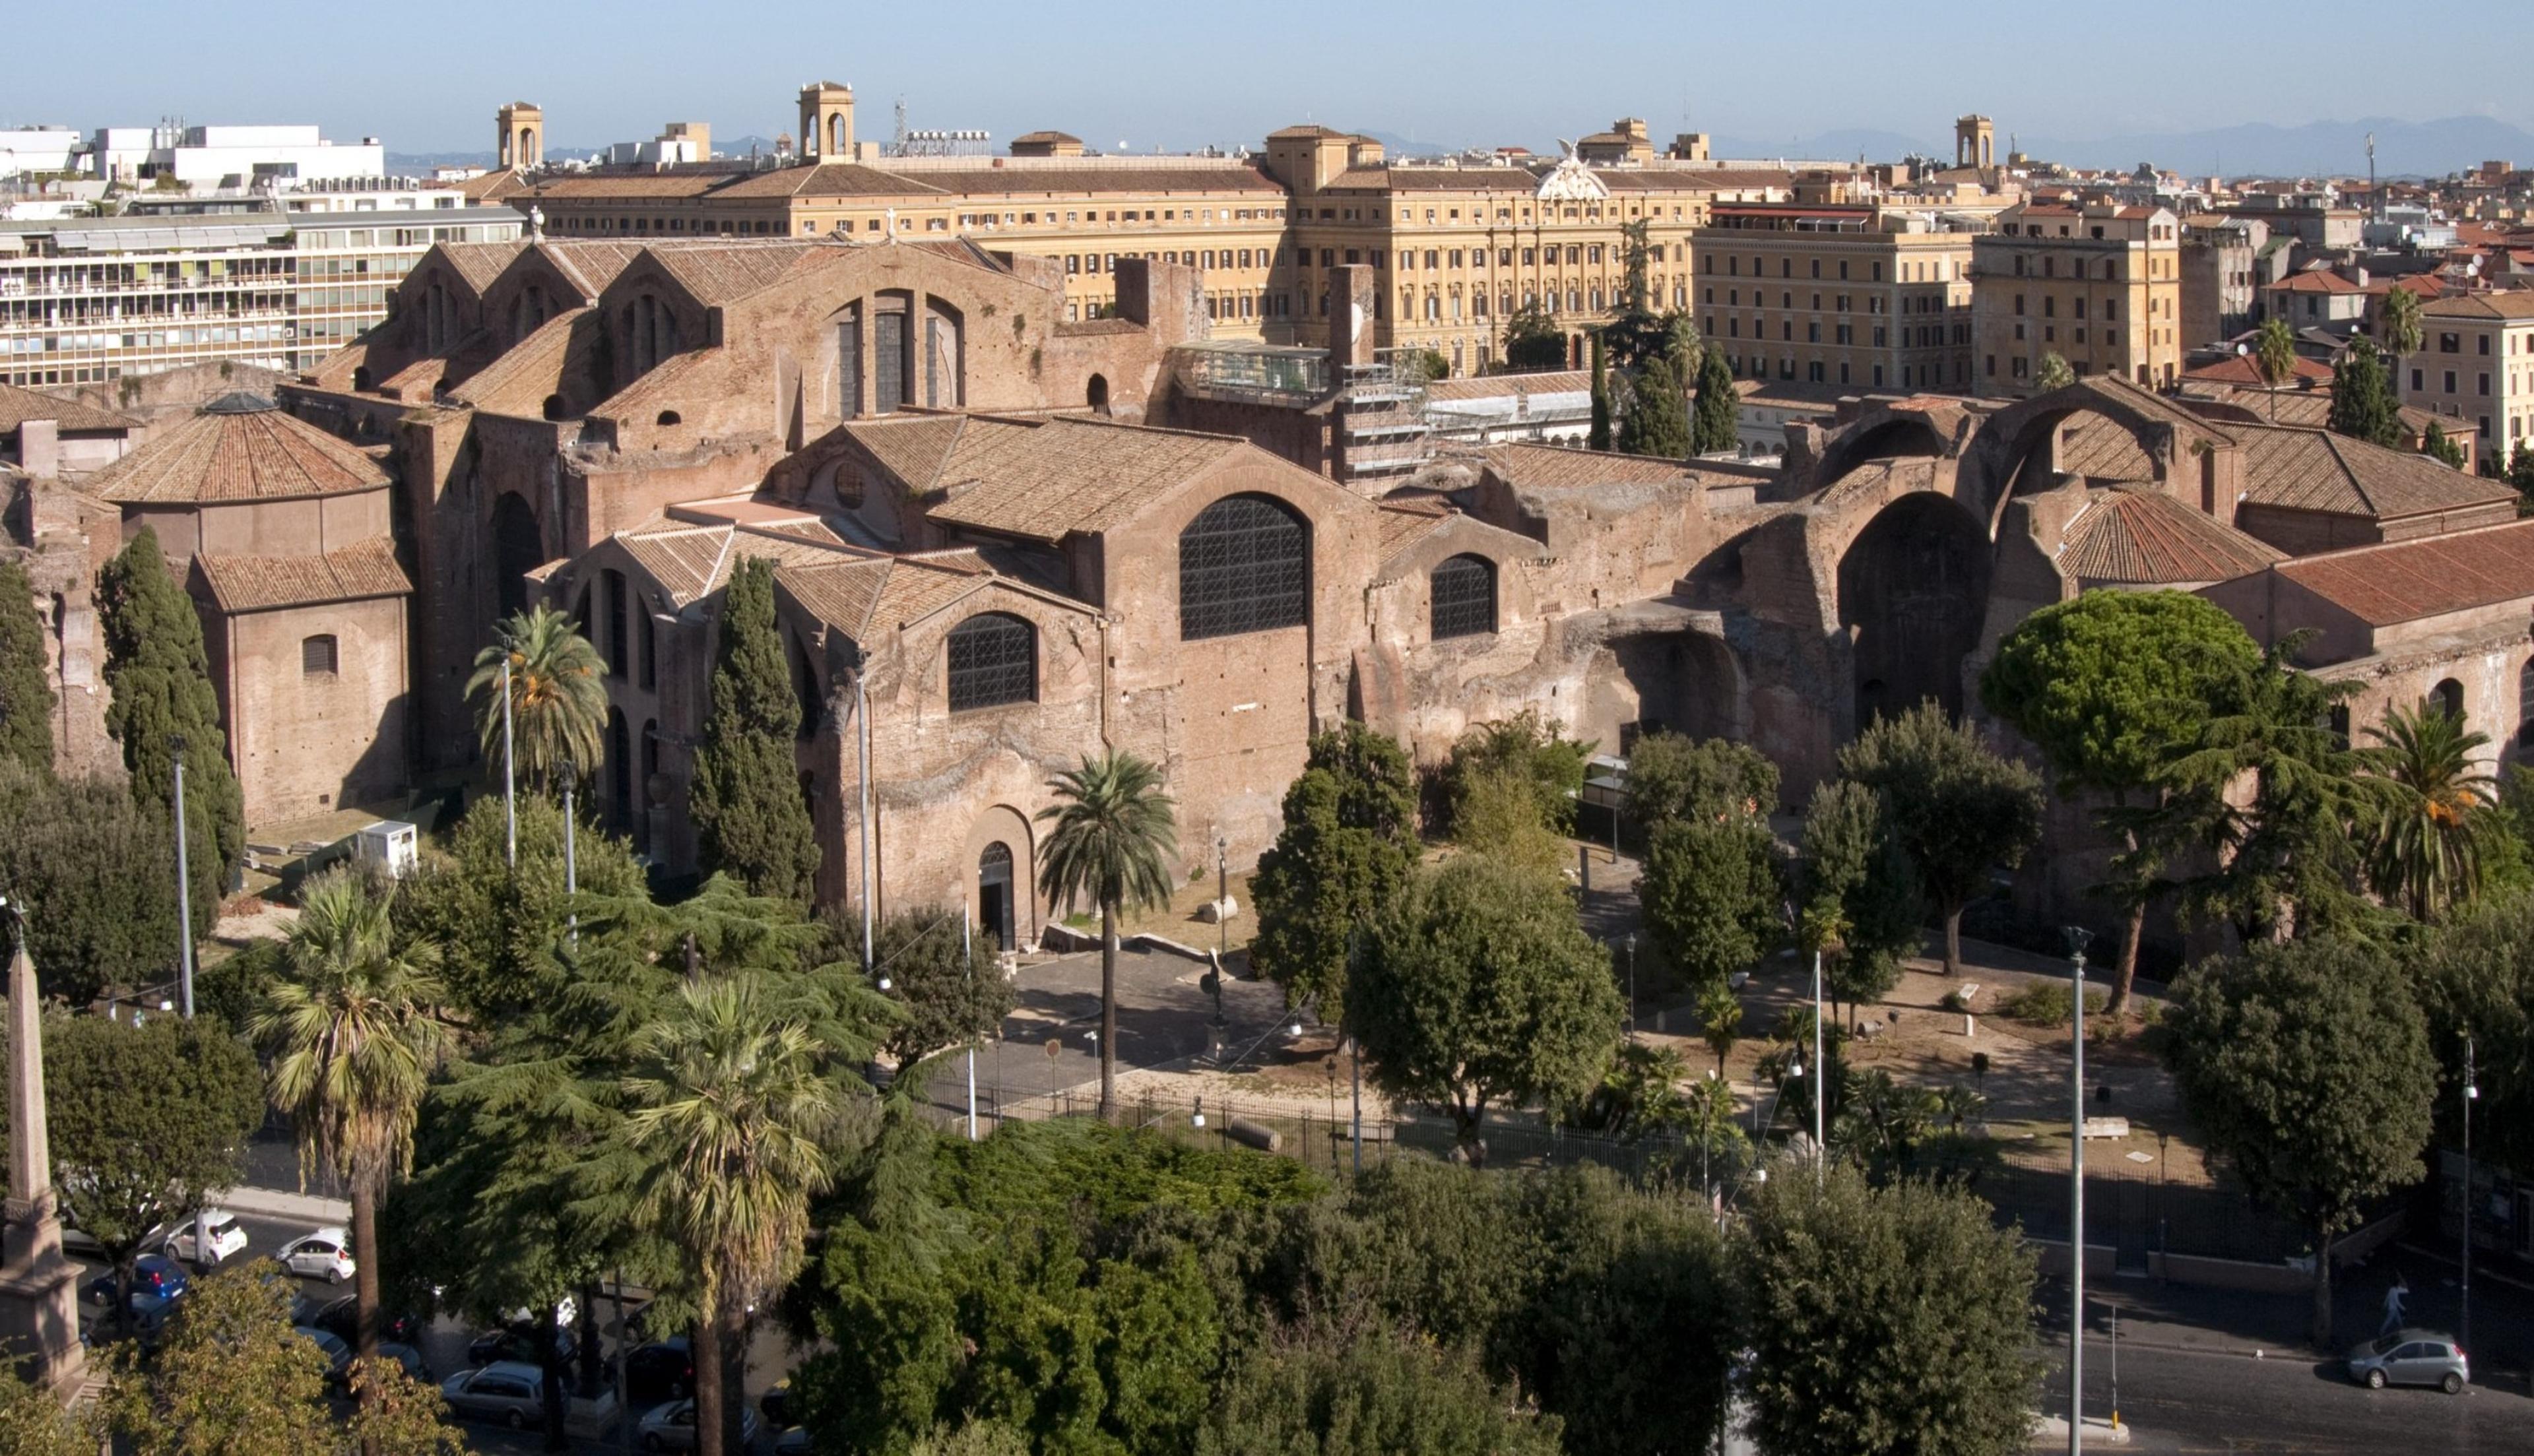 National Museum of Rome - Baths of Diocletian